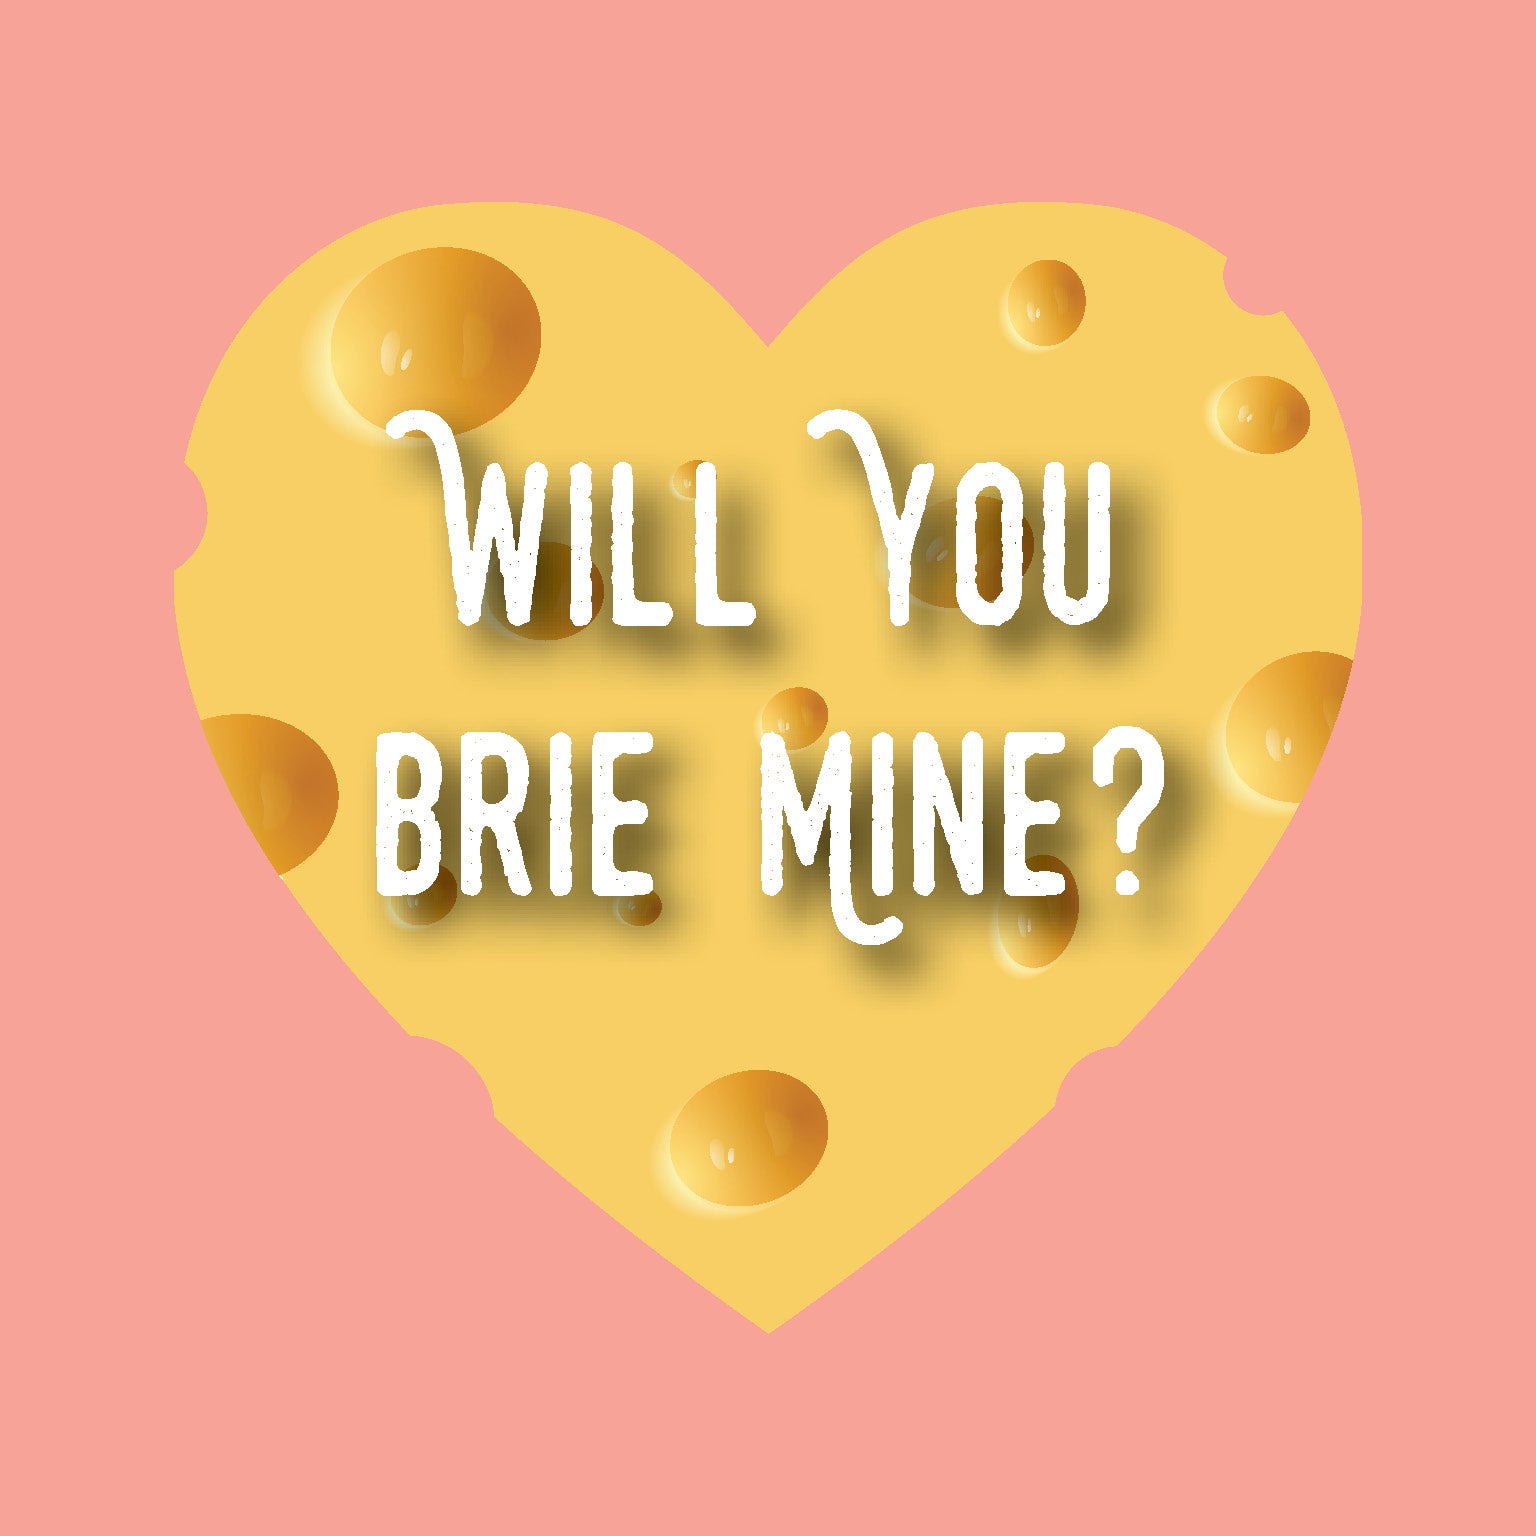 Will you BRIE mine?